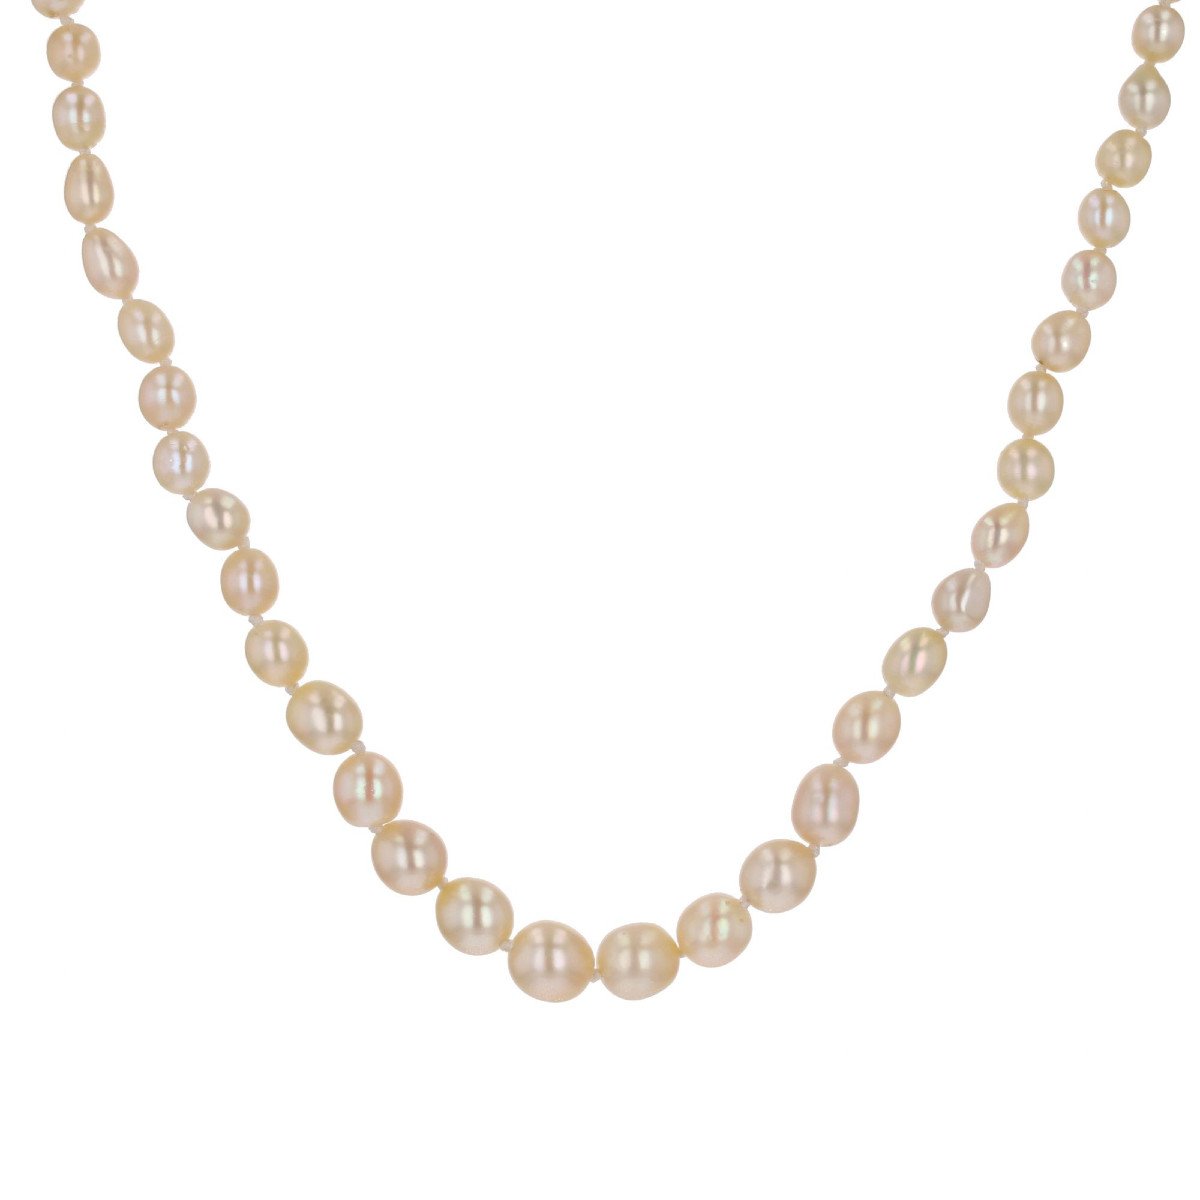 Fine Baroque Pearl Necklace And Its Diamond Clasp